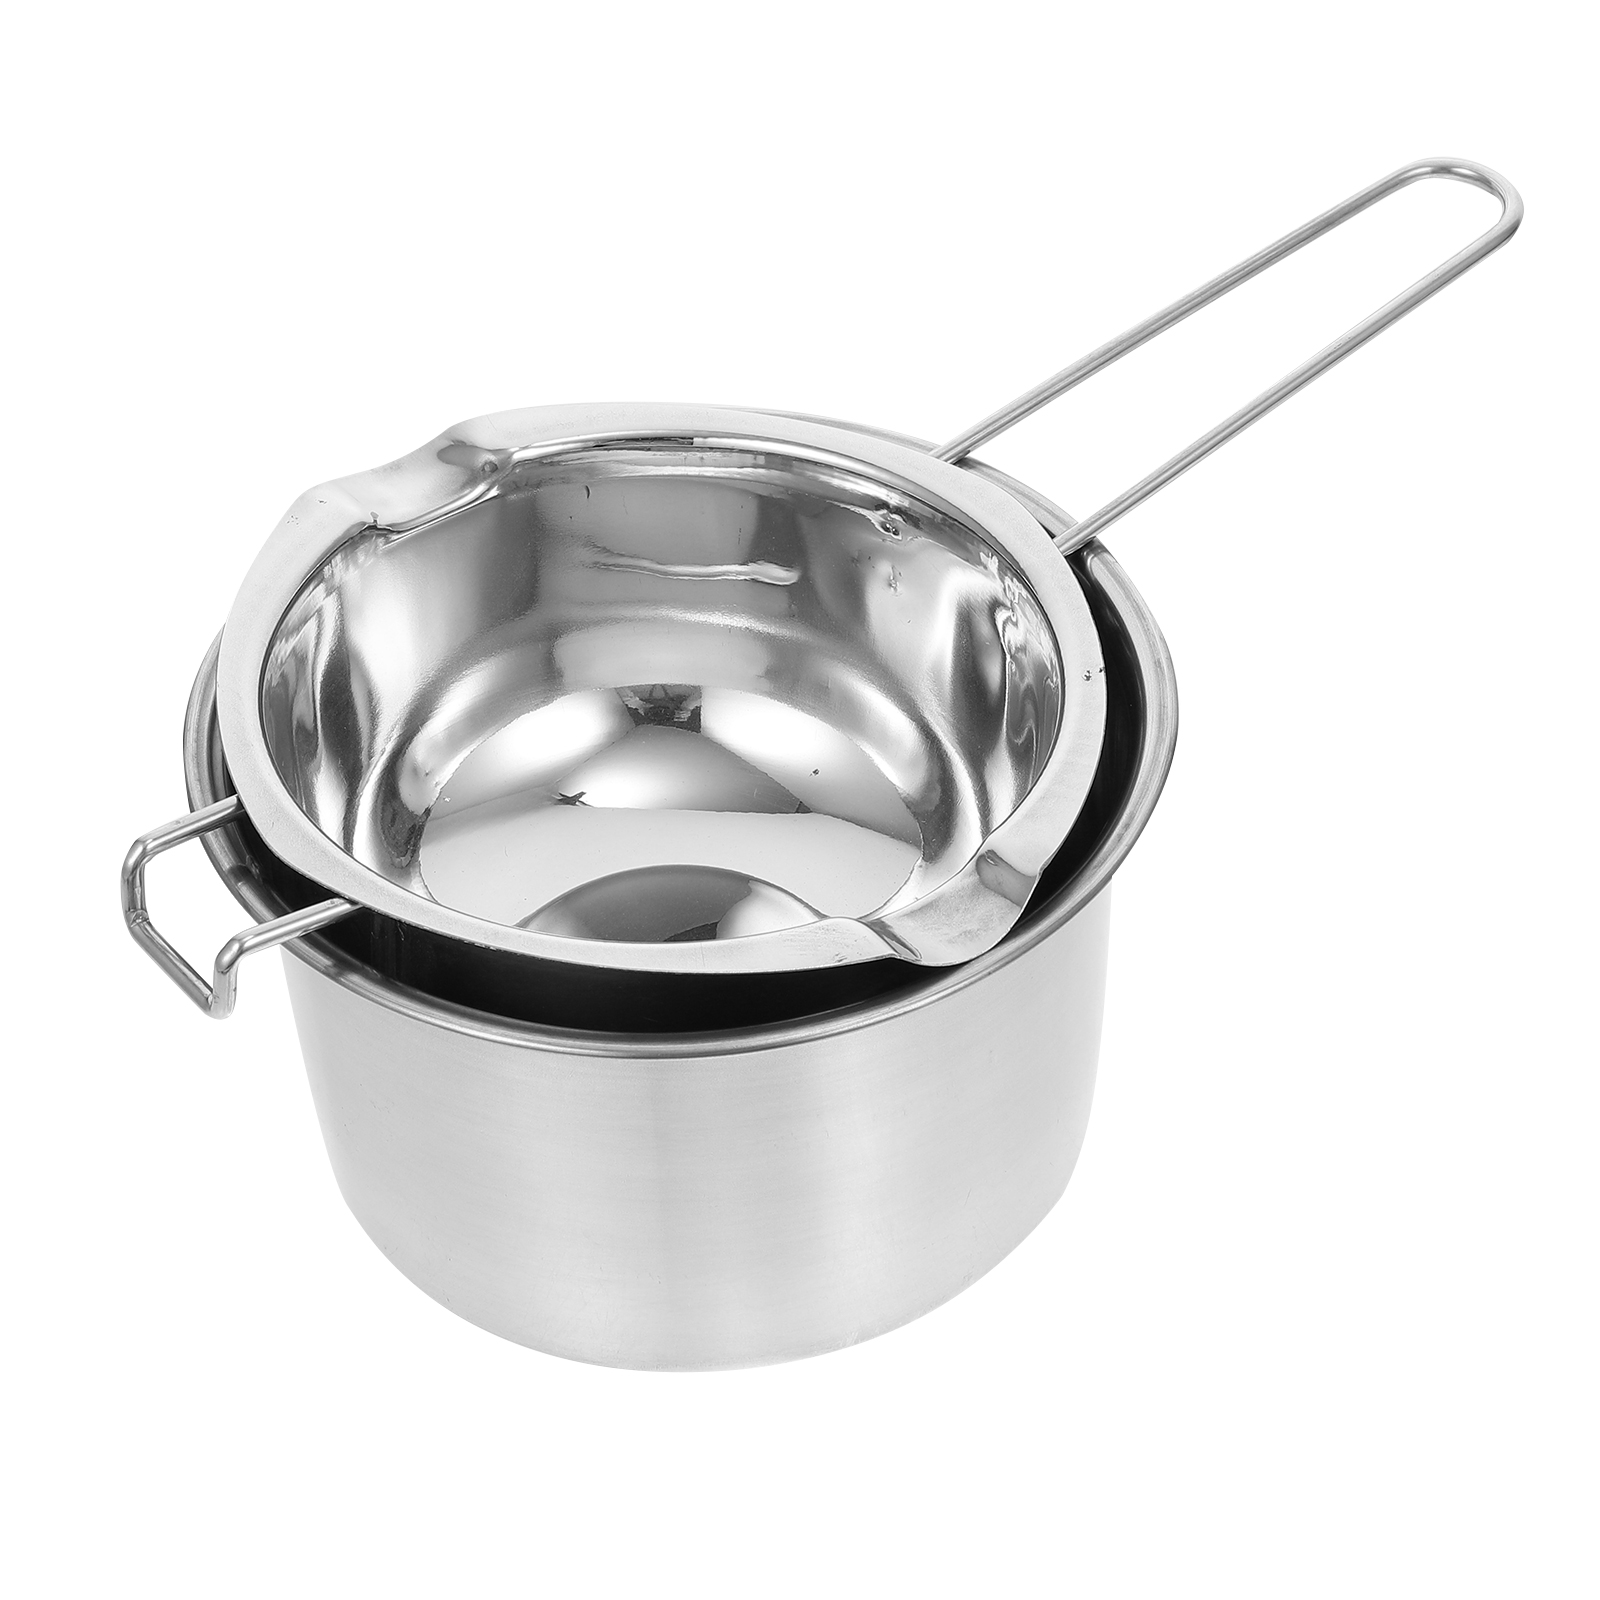 NUOLUX 1 Set Double Boiler Pot Stainless Steel Chocolate Pot Chocolate Melting Pot - image 2 of 6